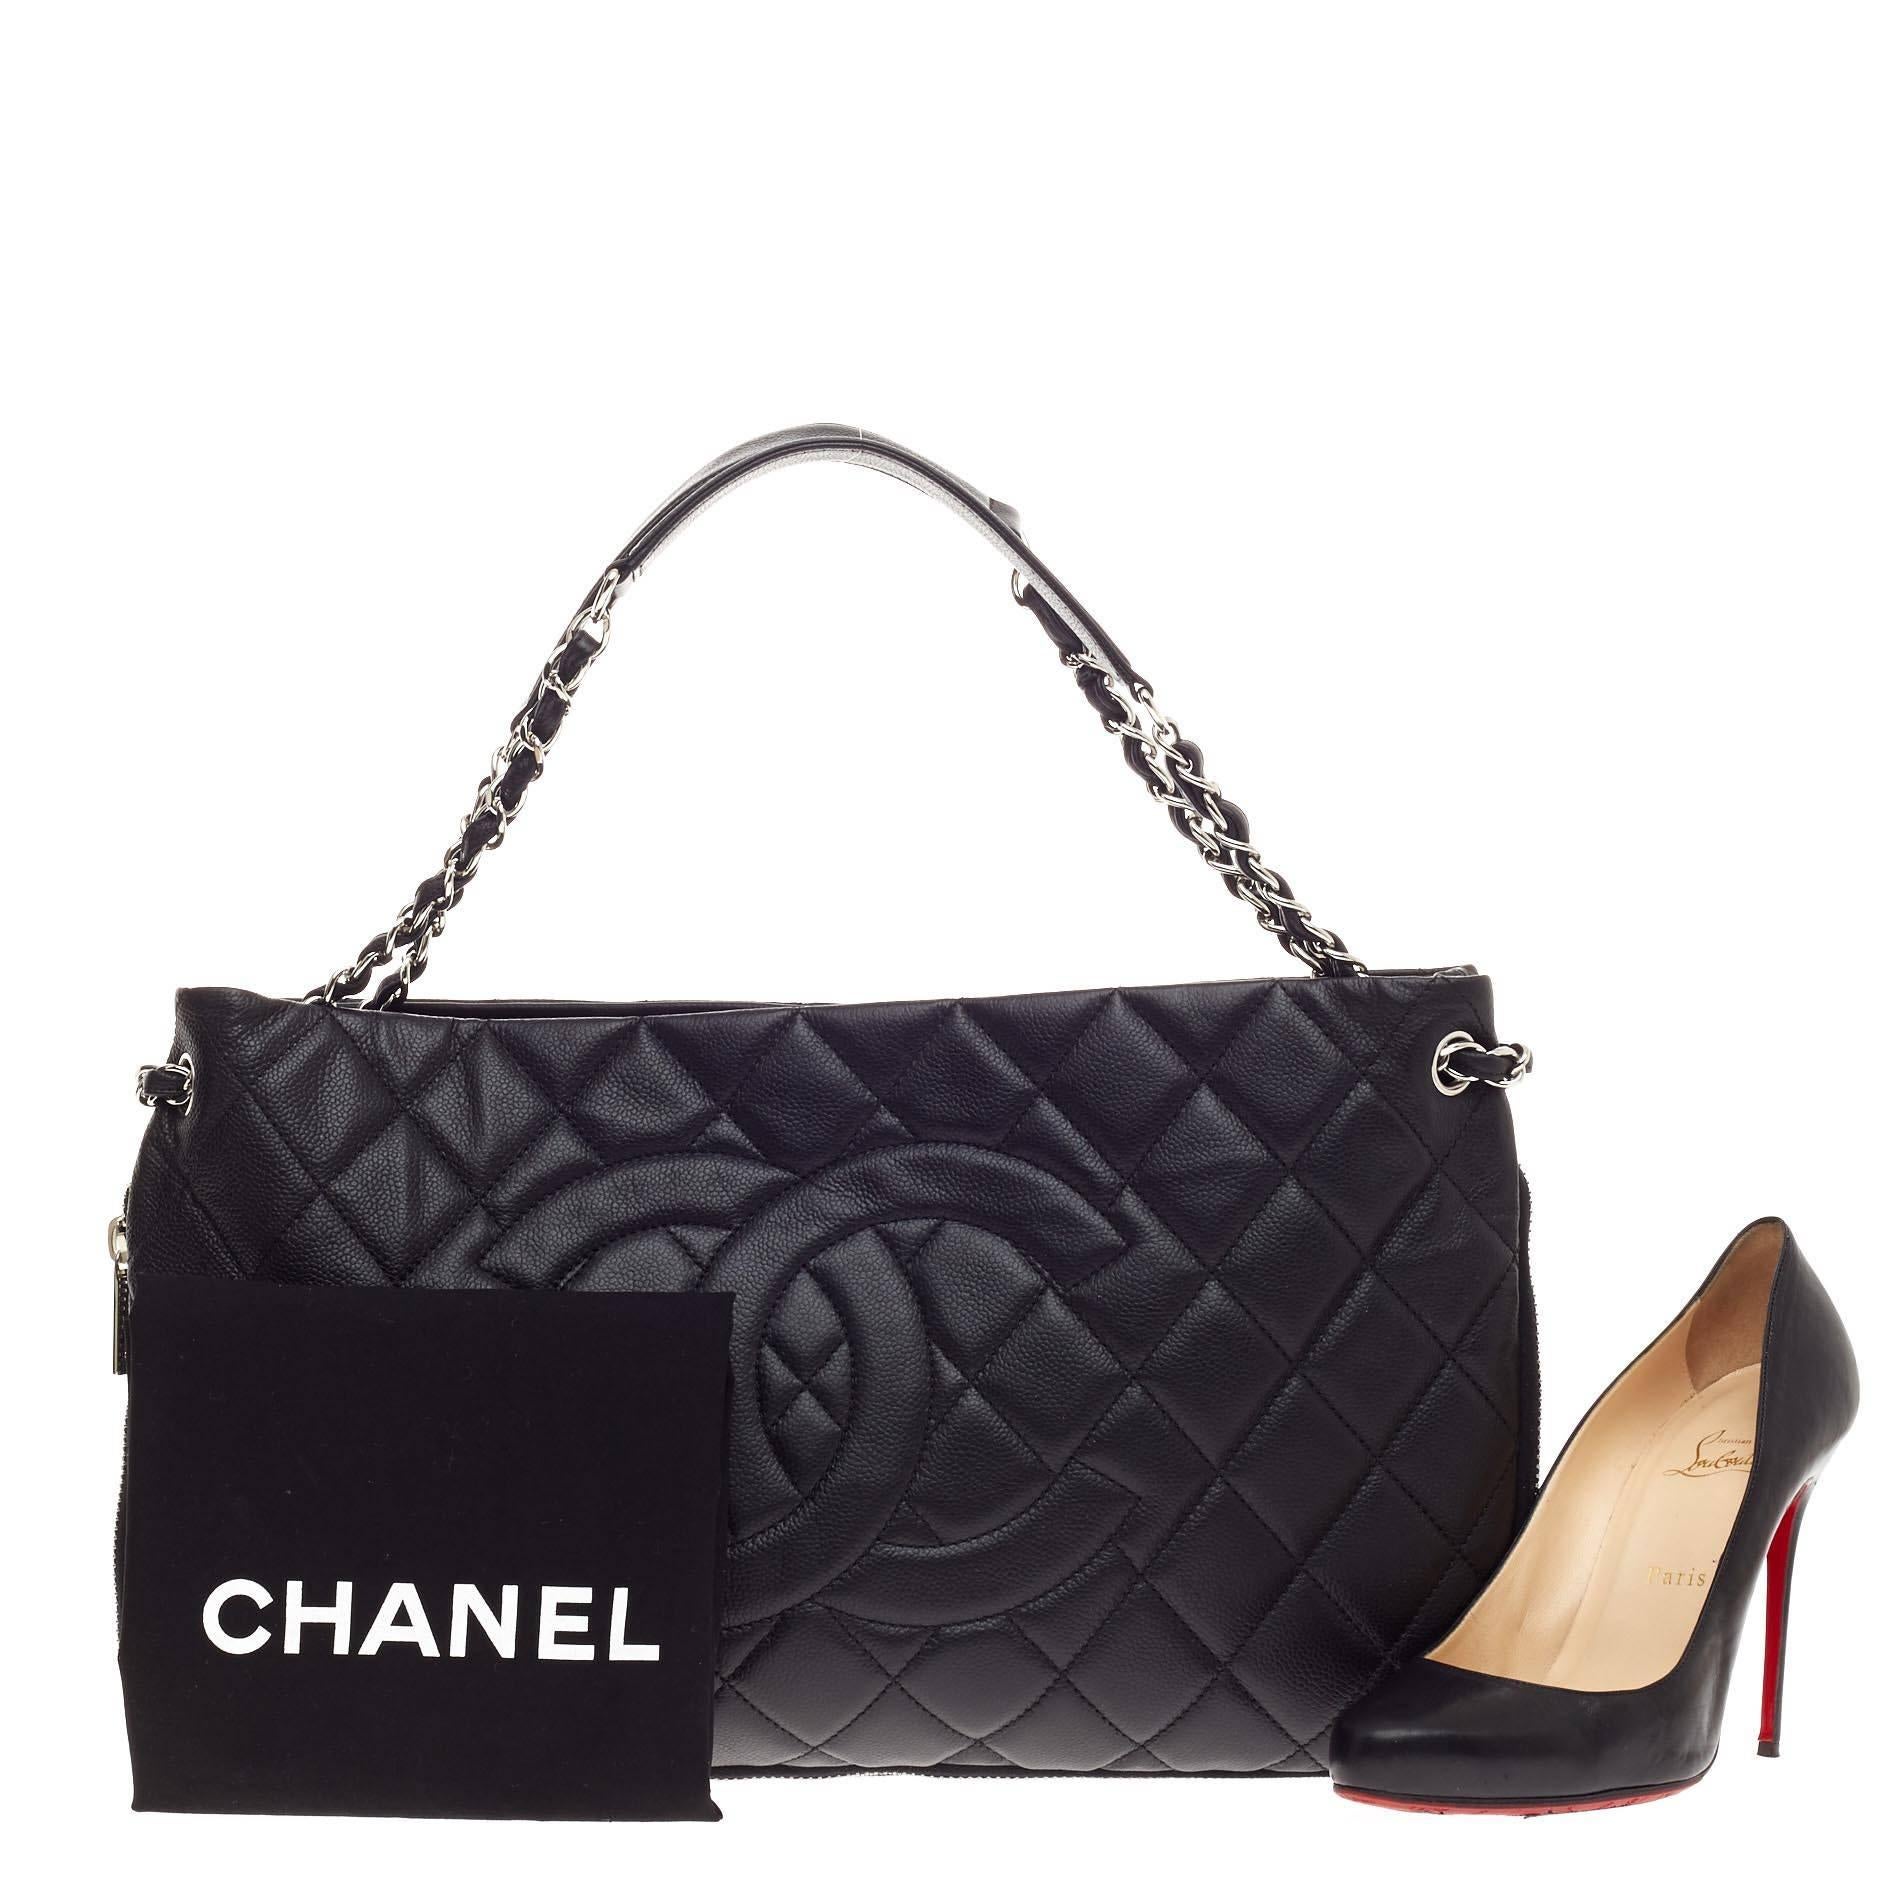 This authentic Chanel Timeless CC Expandable Tote Quilted Caviar Medium mixes modern style and versatility that will compliment a multitude of looks. Crafted from black caviar leather, this unique tote features Chanel's iconic diamond quilting,